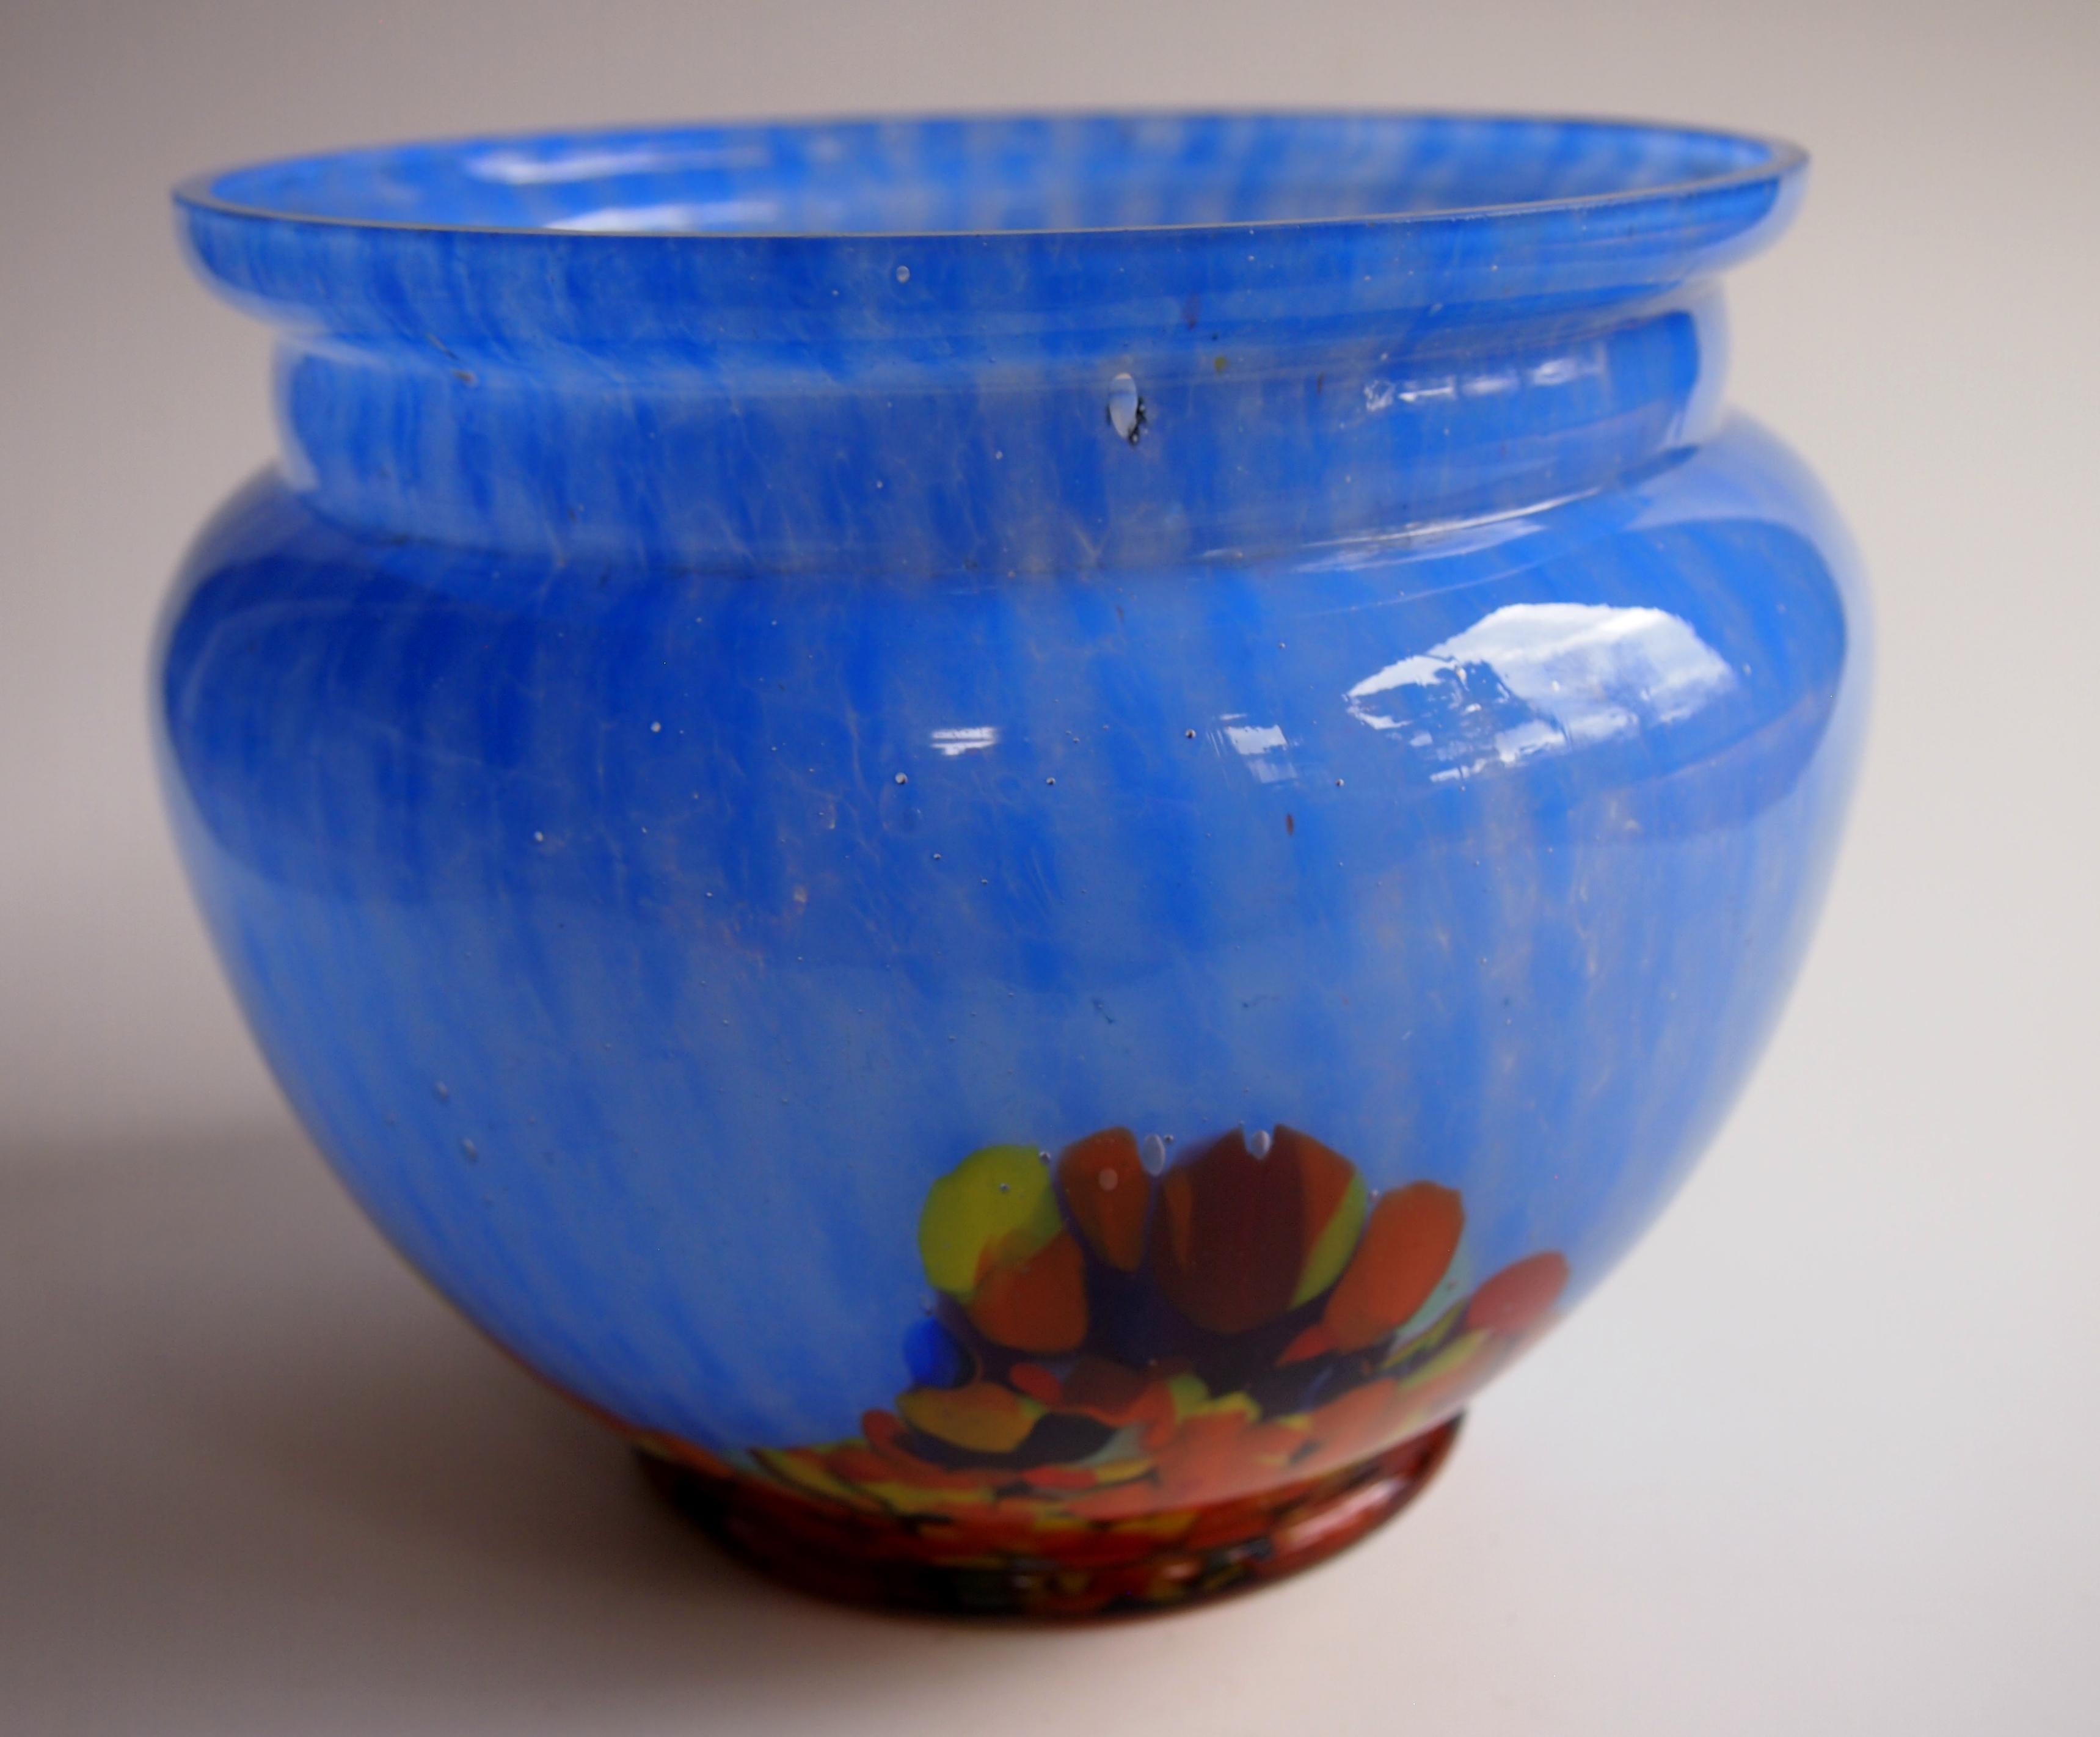 Amazingly rare, large, Art Deco Josephine -Vineta- Kristall vase/bowl, designed by Erwin Pfohl for the Josephine glass works in vibrant stripped blue with polychrome (yellow, red and black) internal decorations, made circa 1930

This bowl is